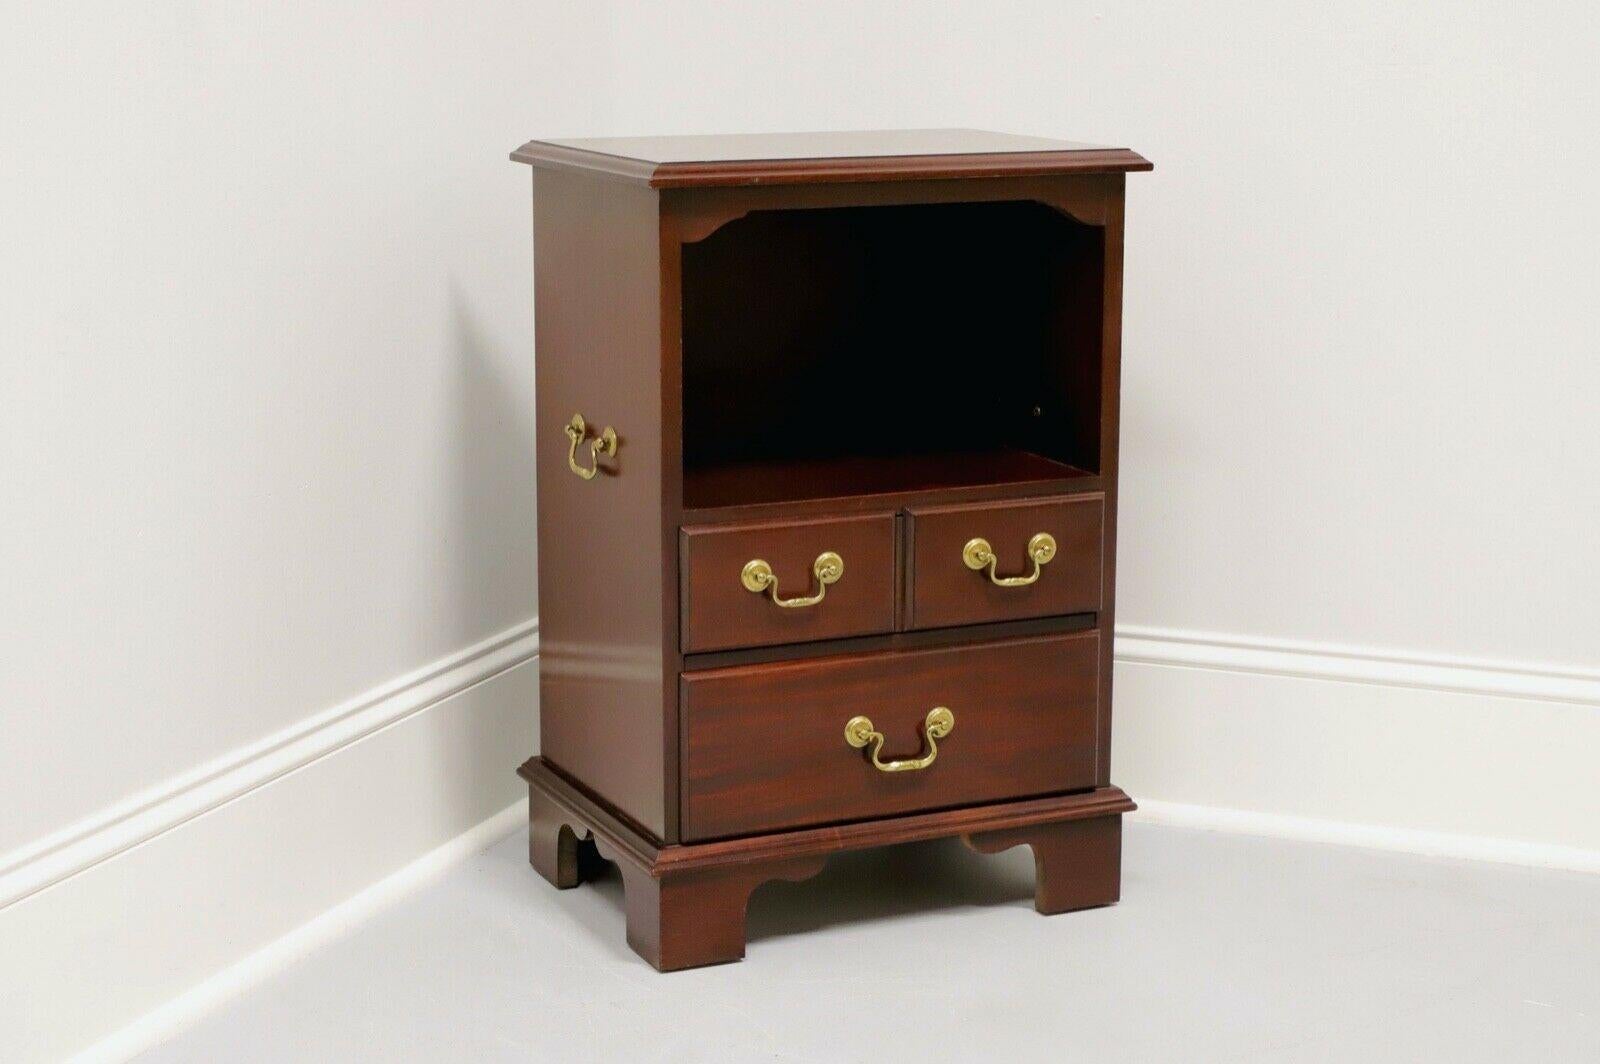 Brass Vintage Inlaid Mahogany Traditional Open Cabinet Nightstand